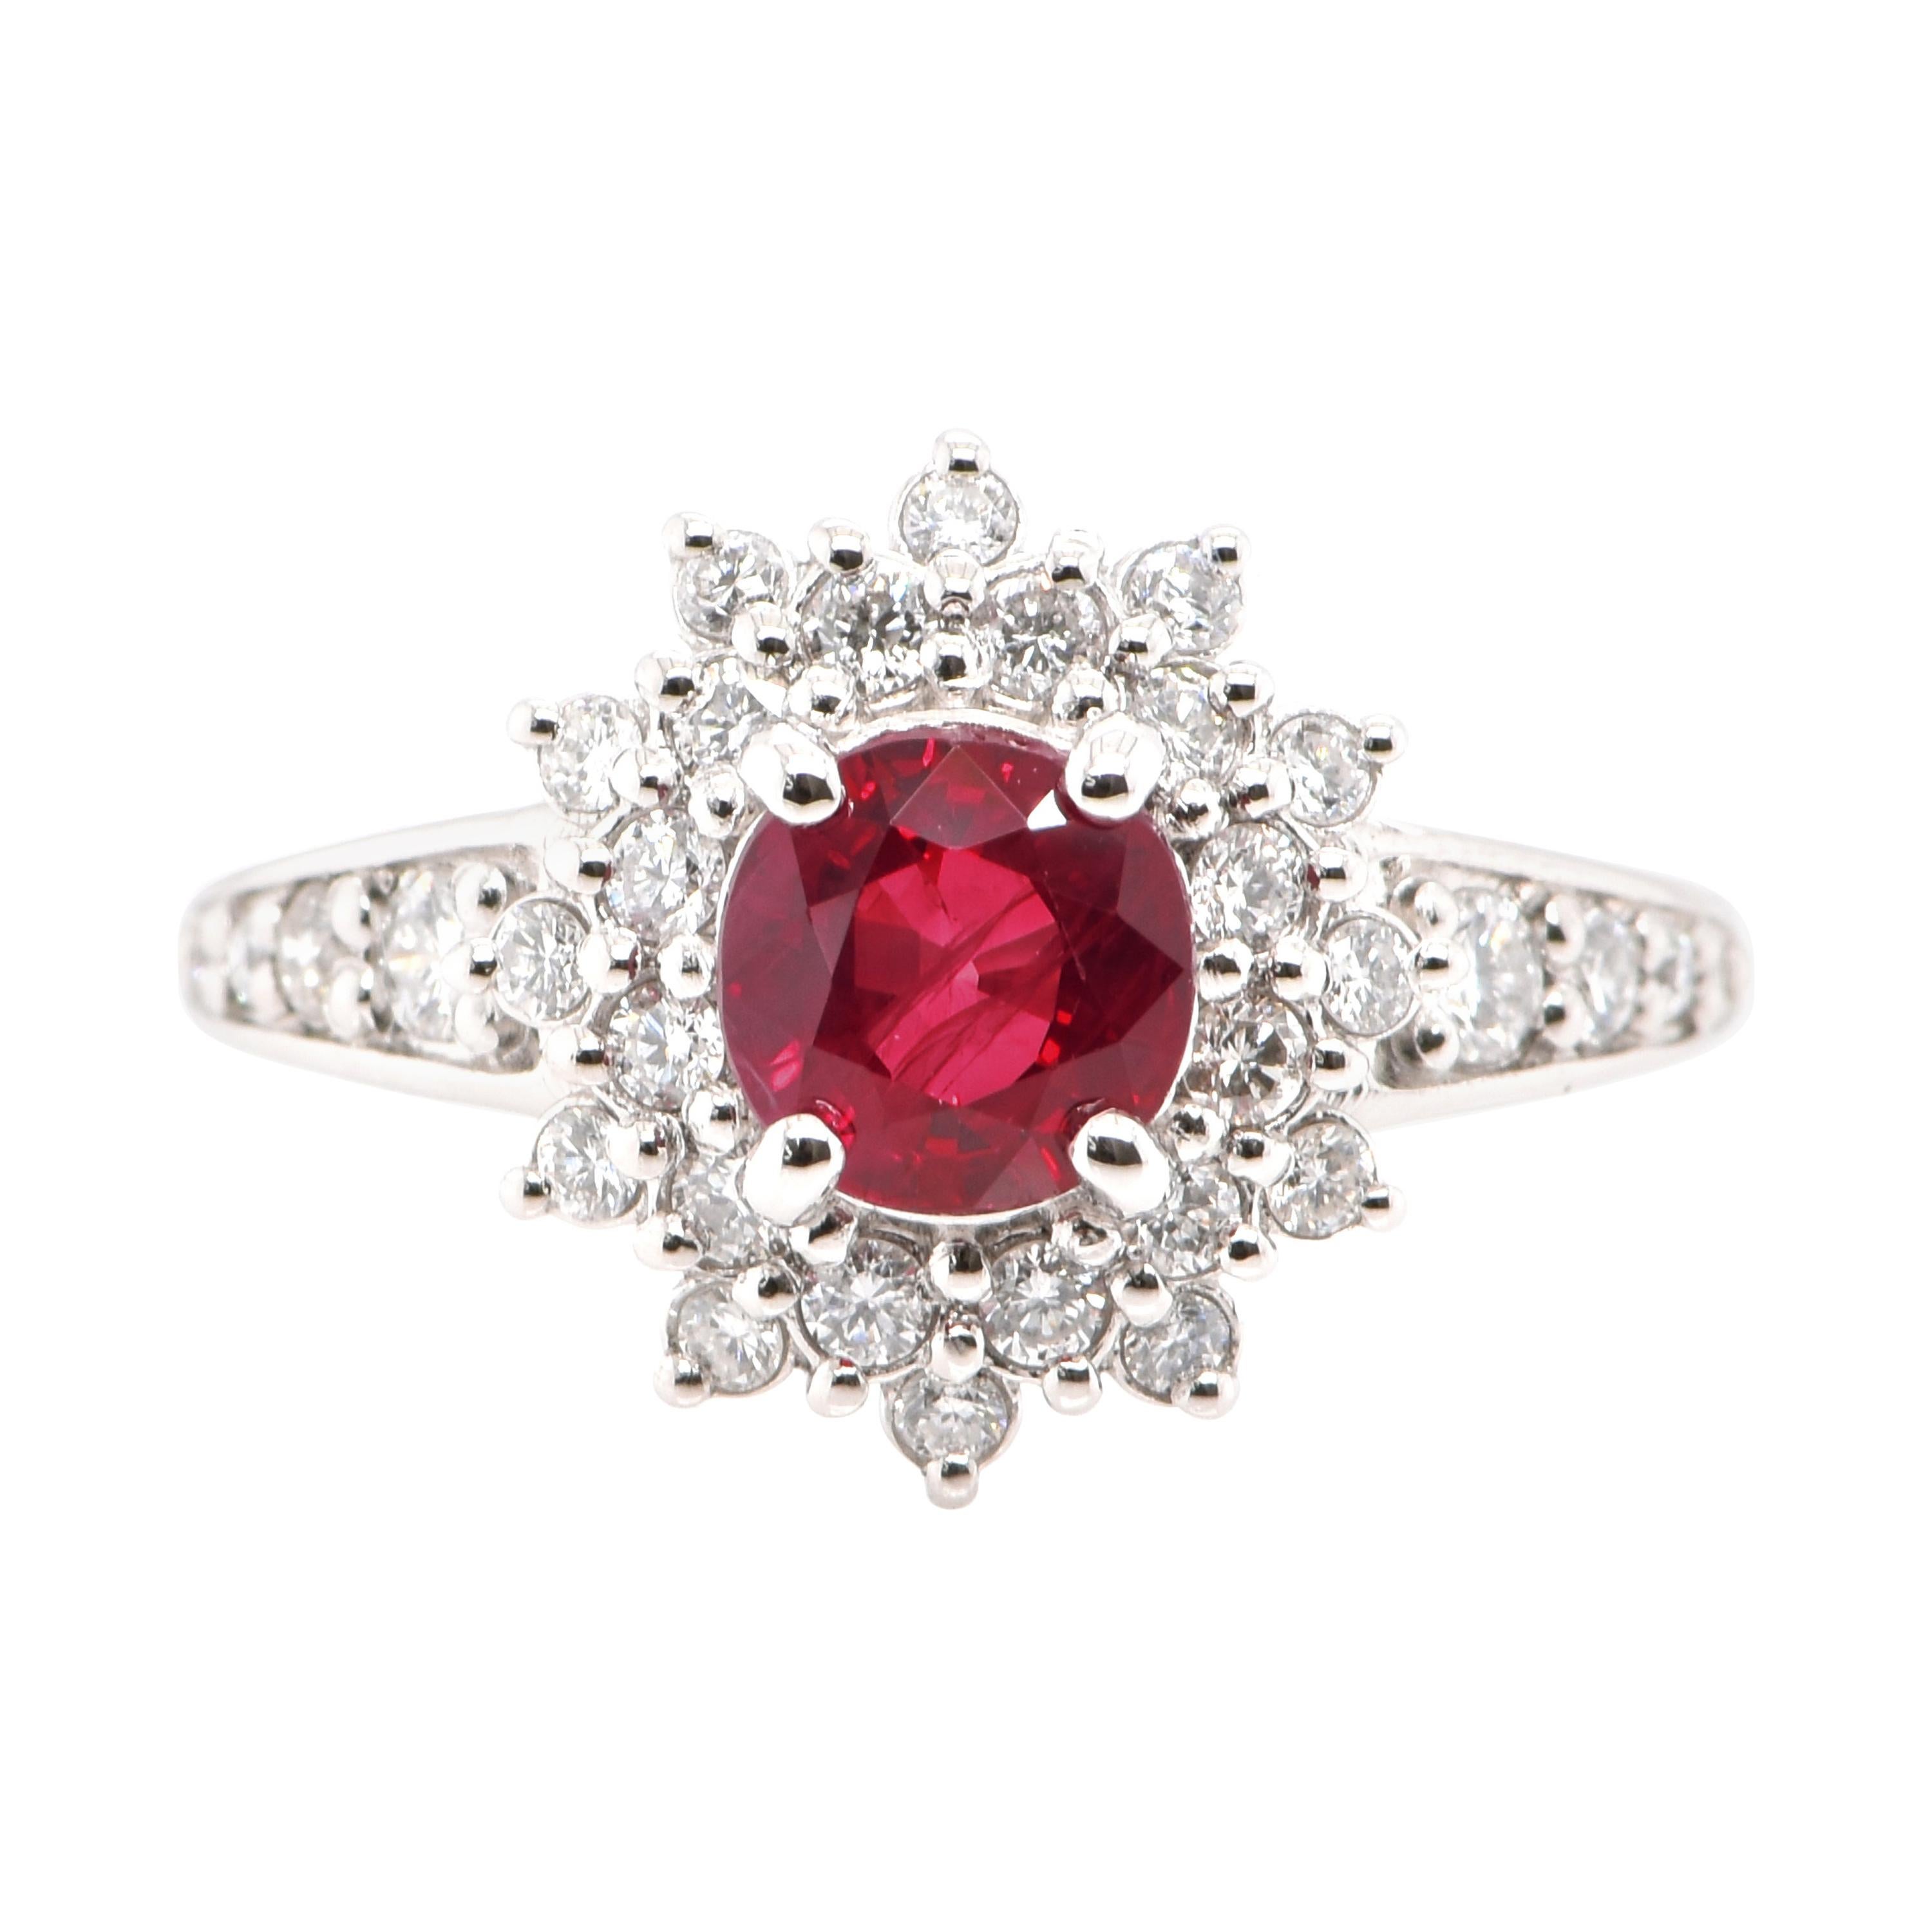 Diana-Style, 1.24 Carat, Natural Round-Cut Ruby and Diamond Ring Set in Platinum